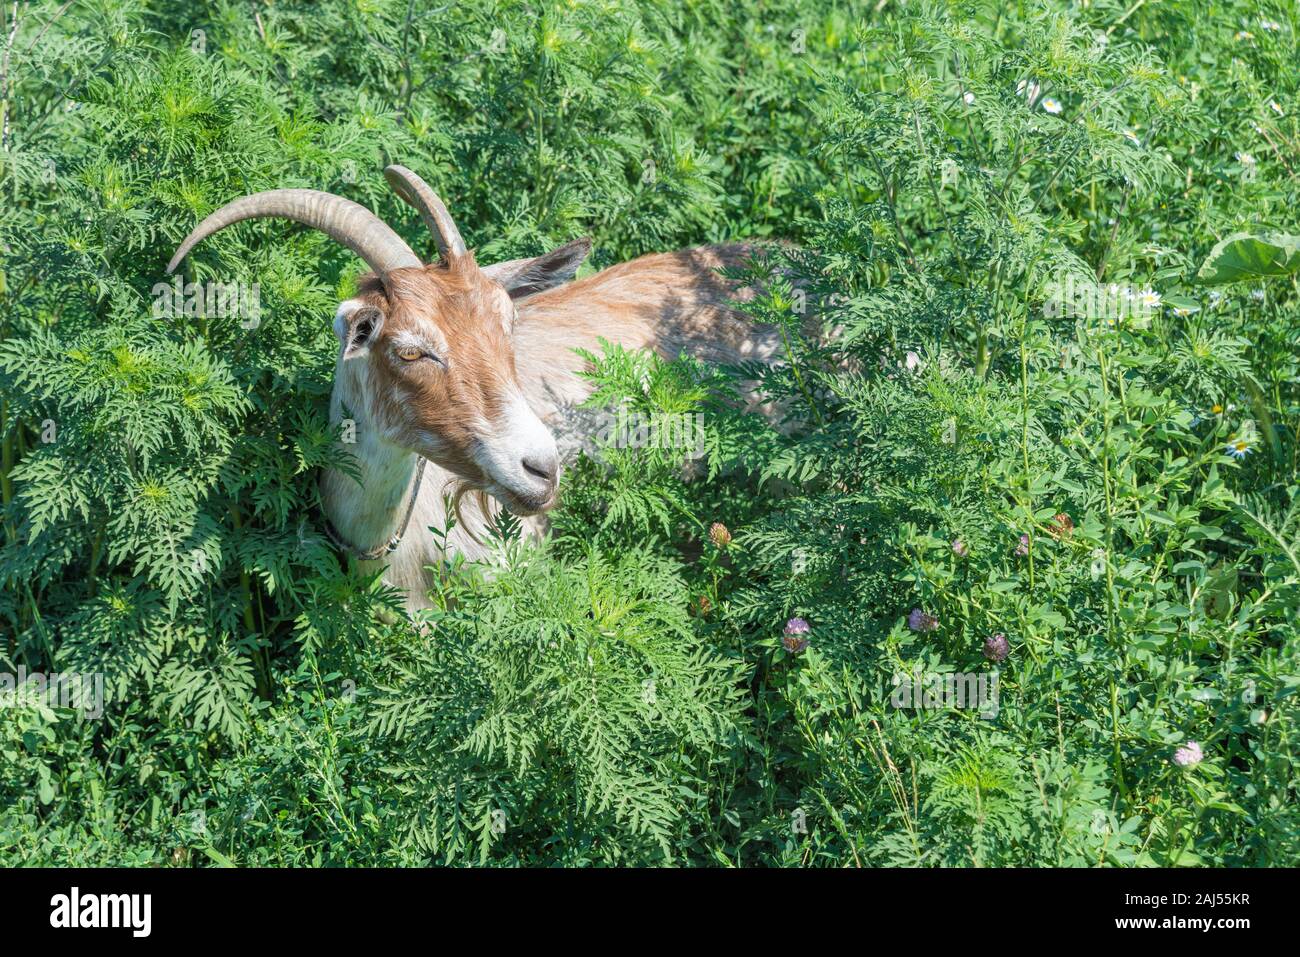 Portrait of a brown goat with yellow eyes grazing in a meadow with lush grass on a bright summer day Stock Photo